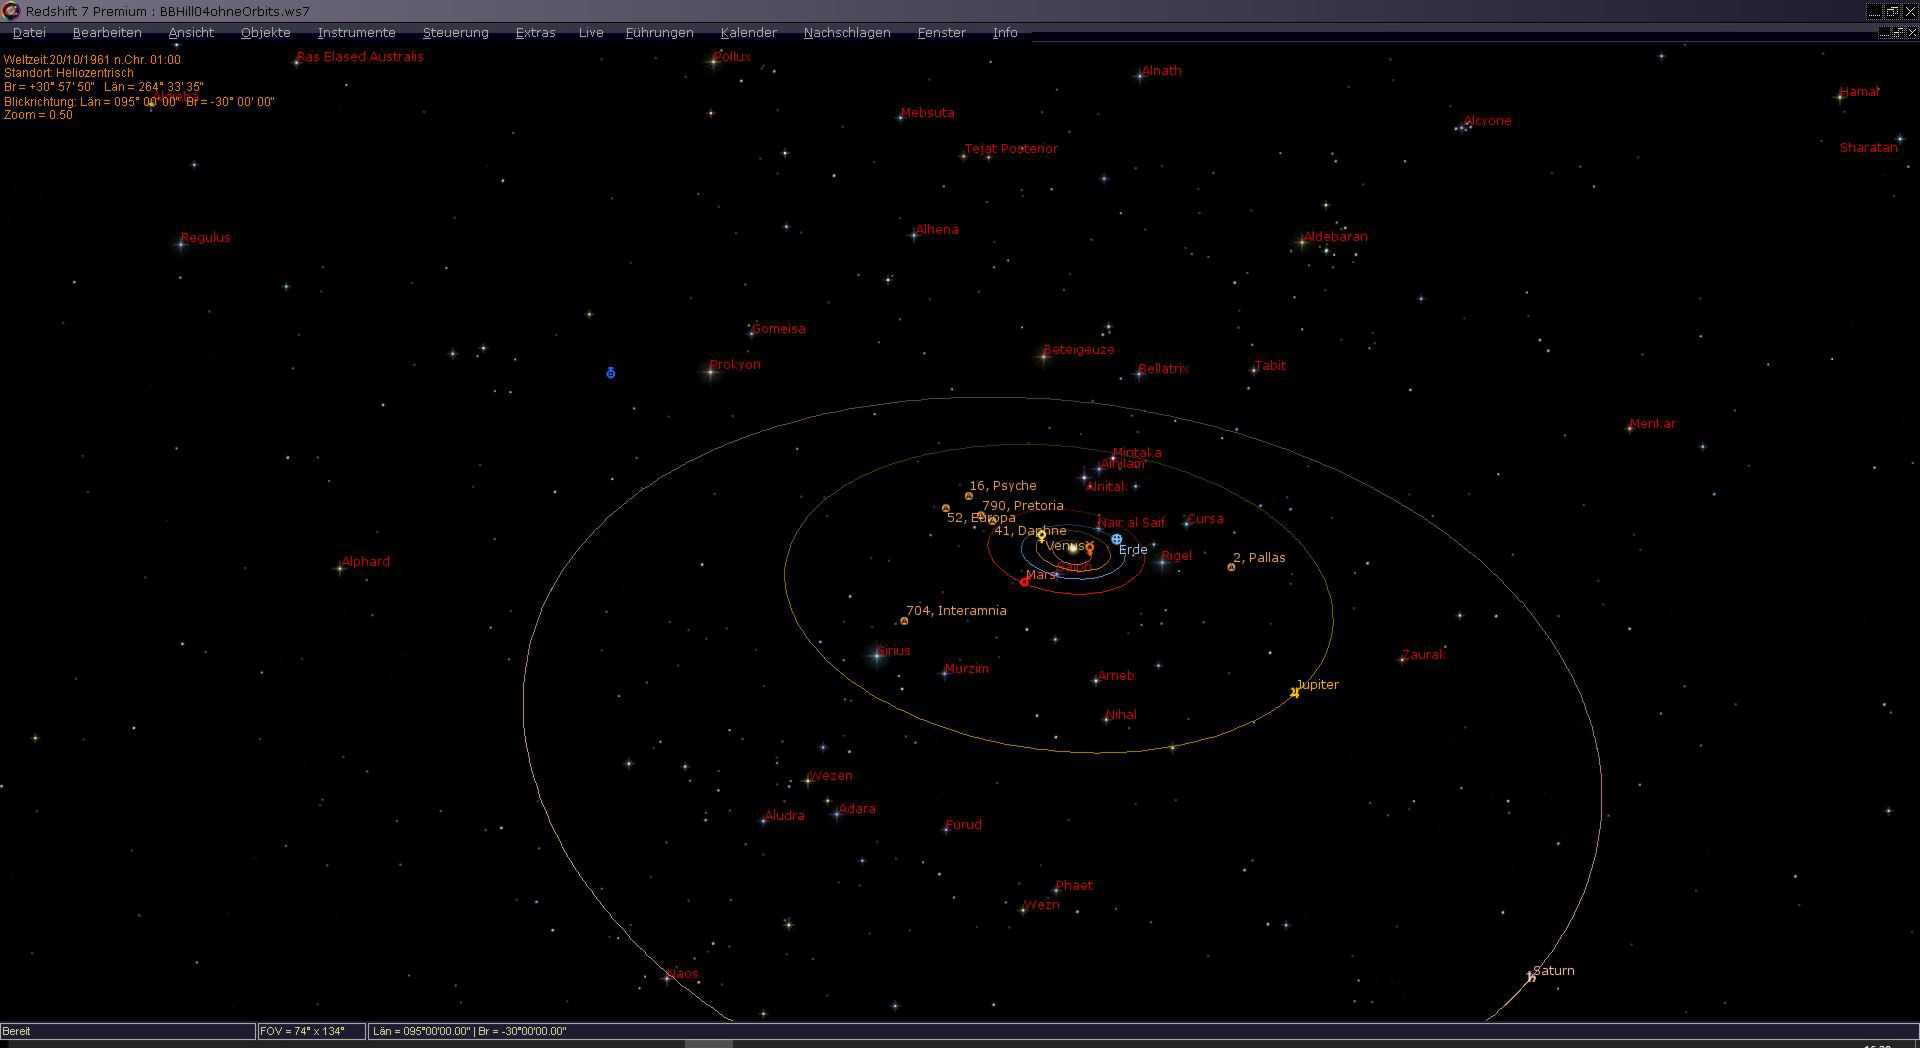 Our Solar System without the orbits of Uranus and Neptune